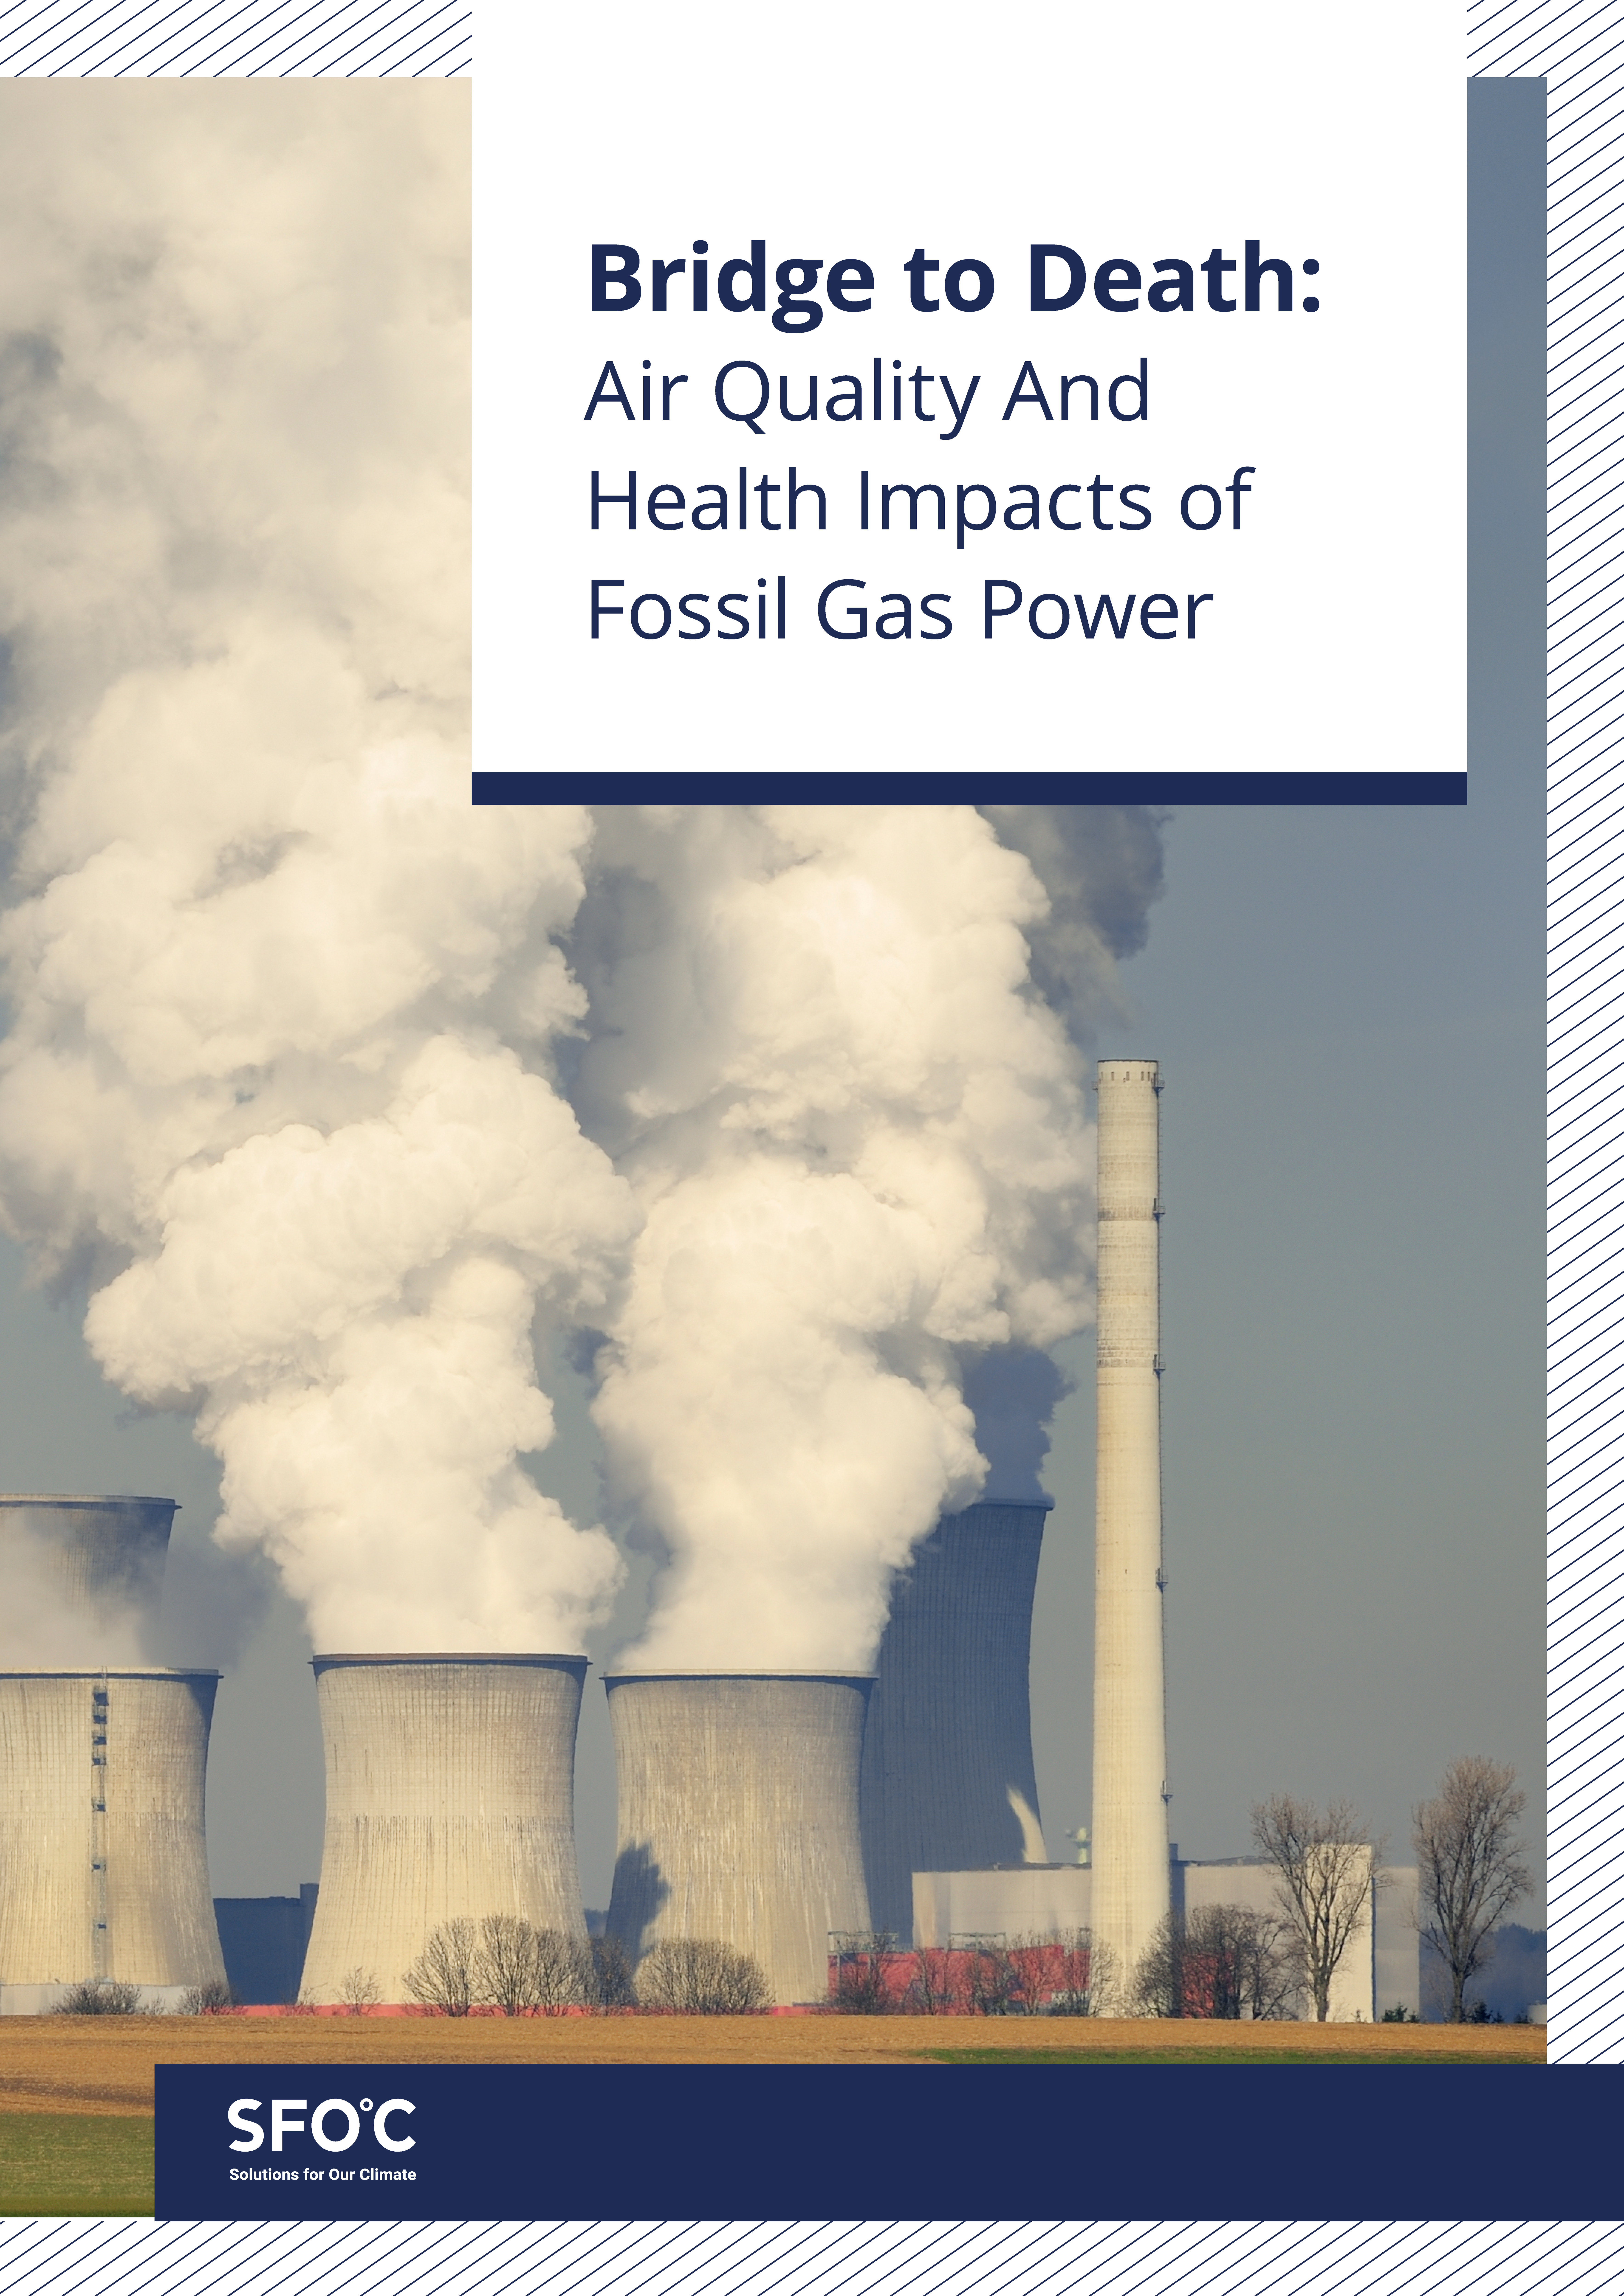 Bridge to Death: Air Quality And Health Impacts of Fossil Gas Power